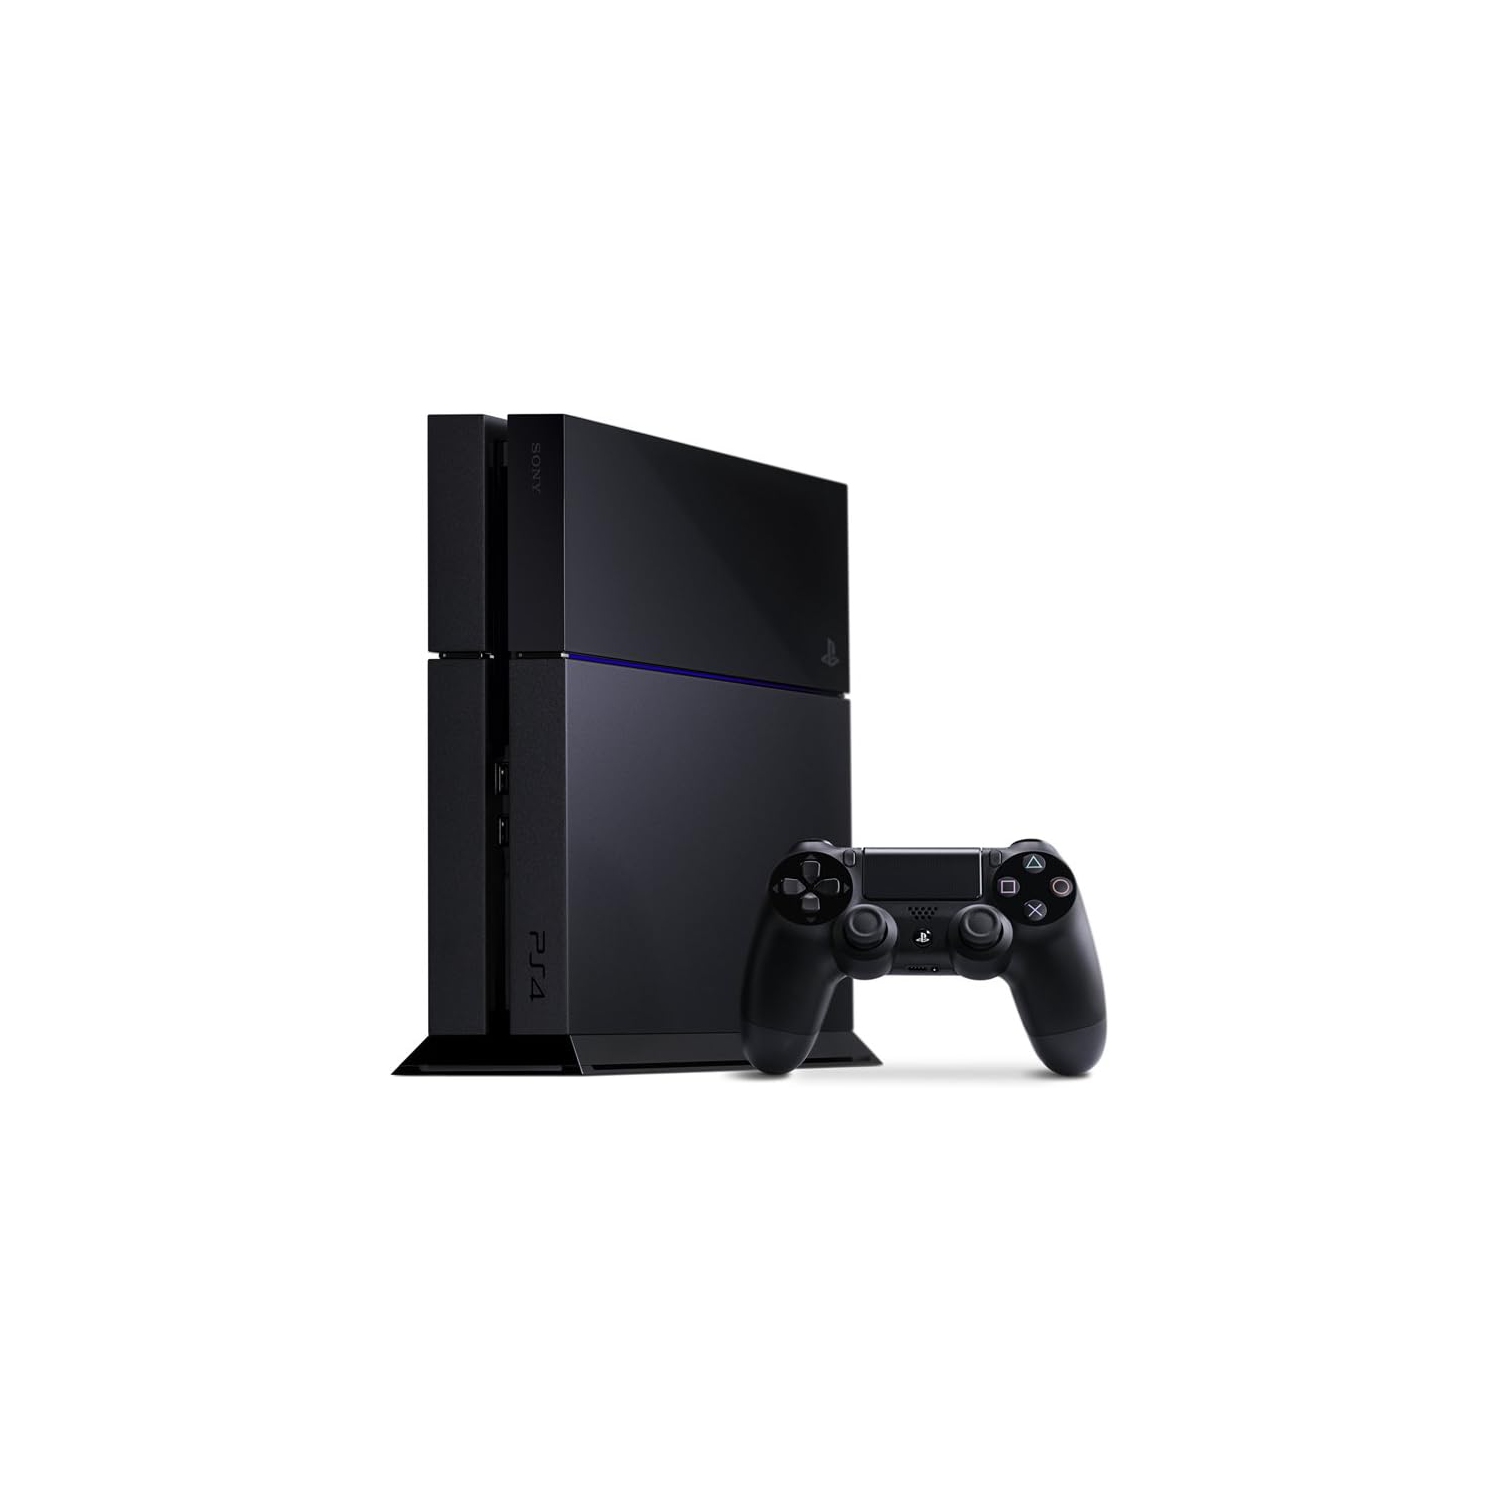 Refurbished (Good) - Sony PlayStation 4 500GB Console with Controller